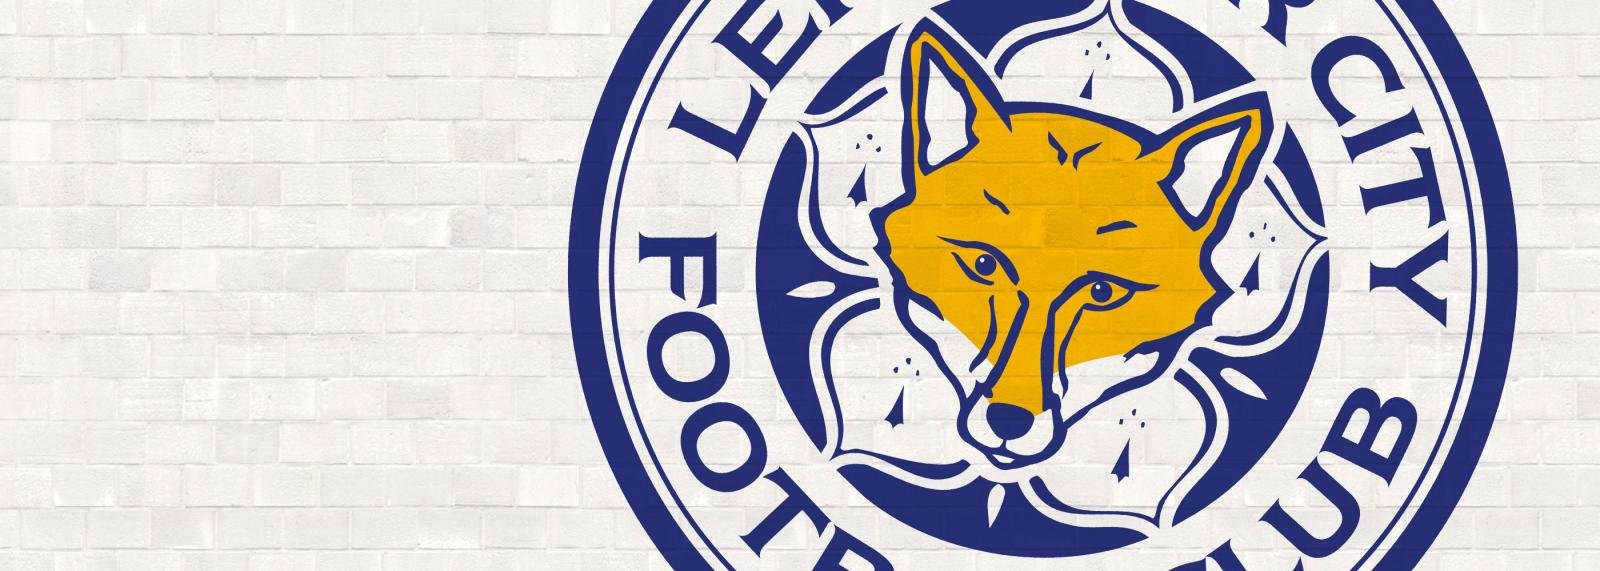 On-loan Leicester City striker keen to open Raith Rovers account at Falkirk